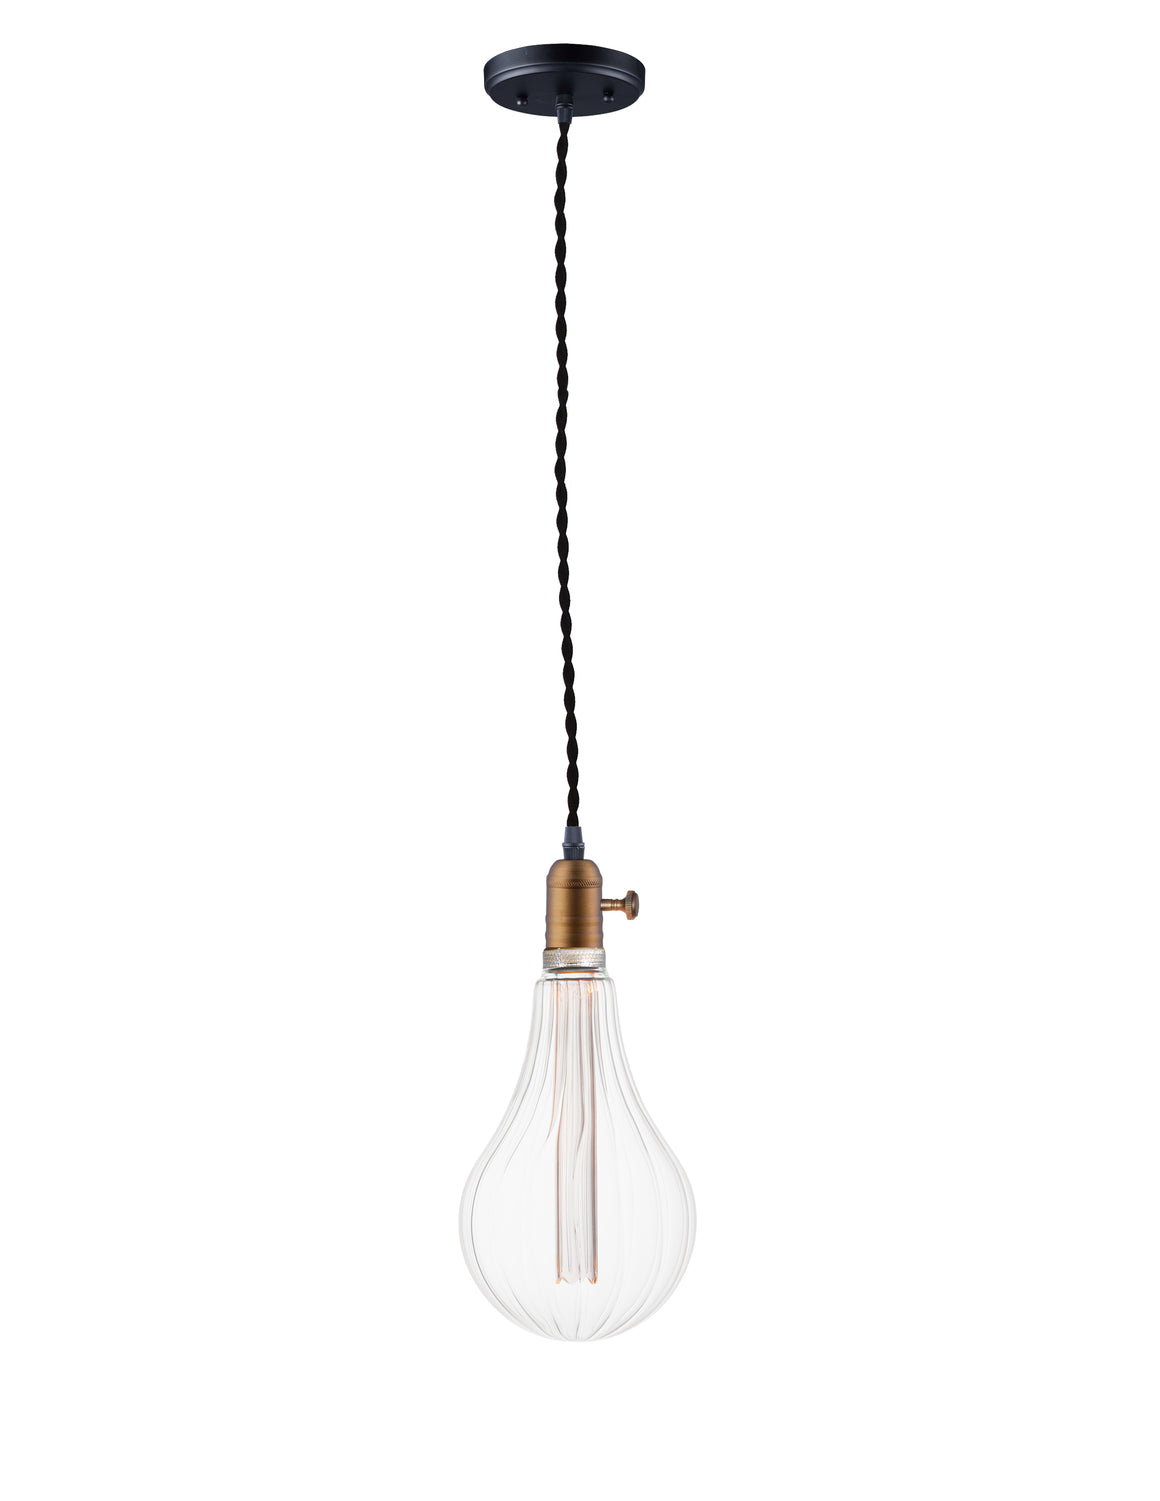 Early Electric 1-Light Pendant with A52 LED Bulb